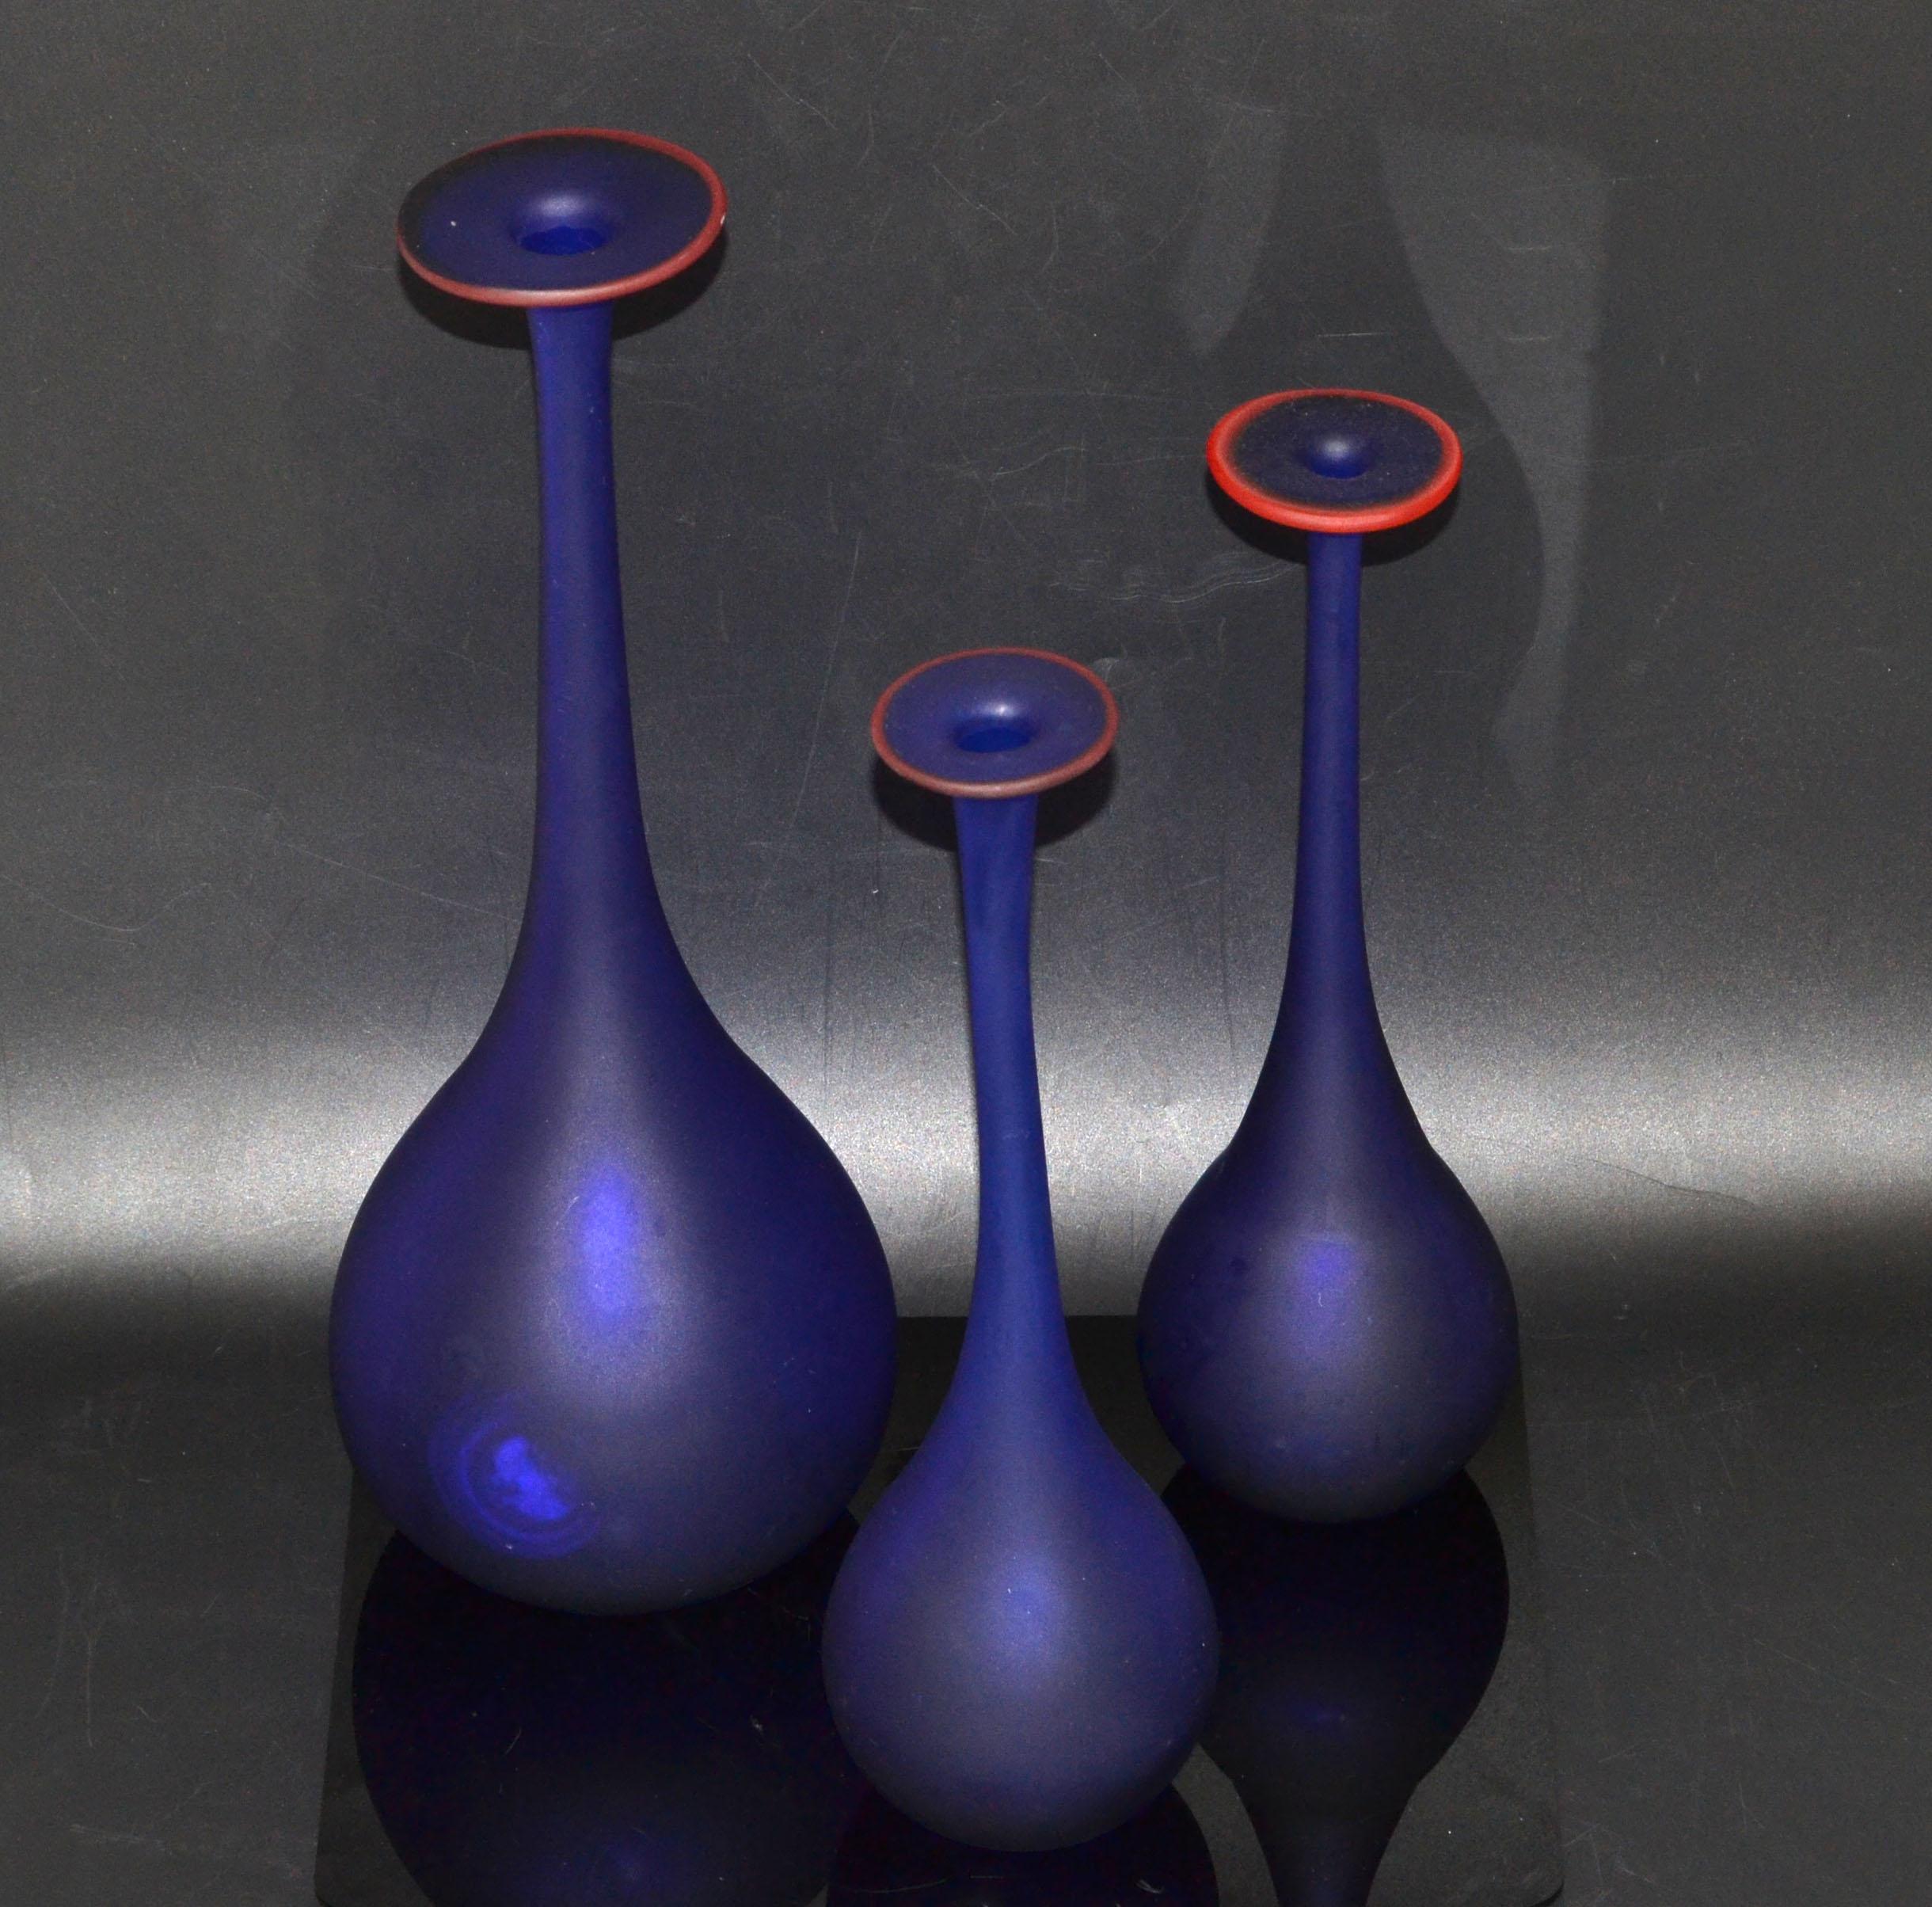 3 Nesting Vases Moretti Style Translucent Blue & Red Satin Glass Bud Vases Italy In Good Condition For Sale In Miami, FL